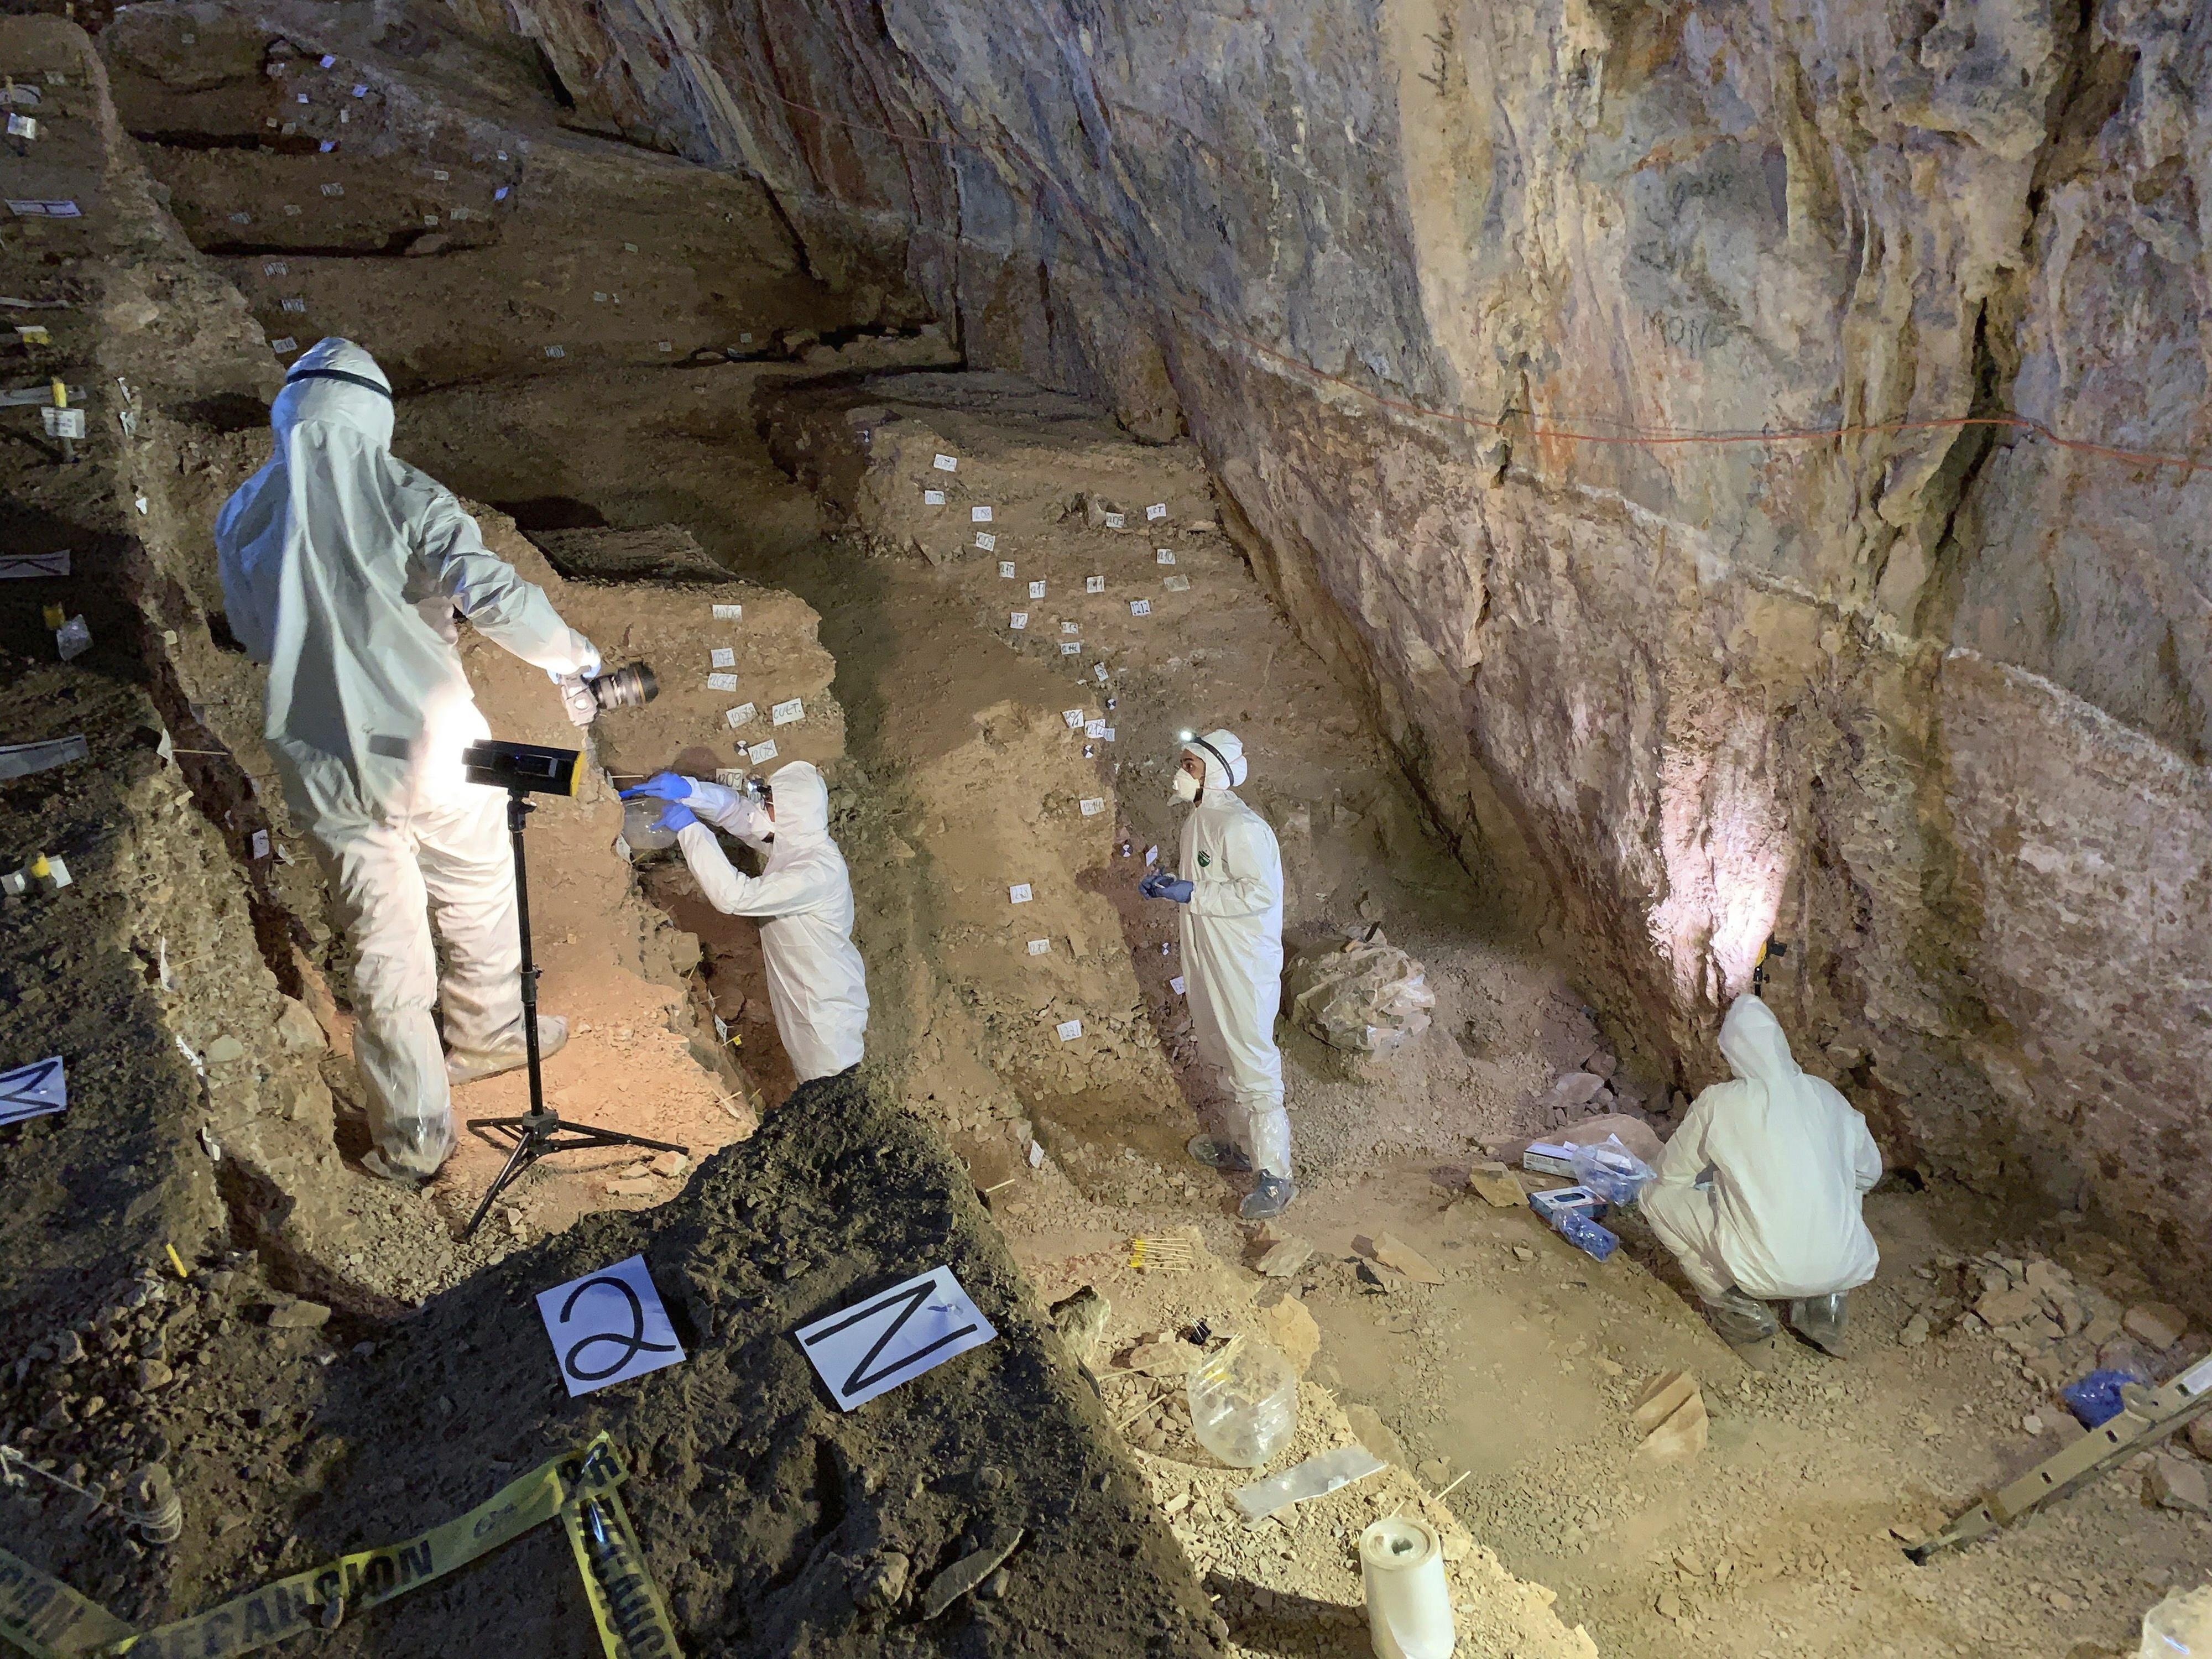 Researchers take samples from different cultural layers in a cave in Zacatecas, central Mexico 